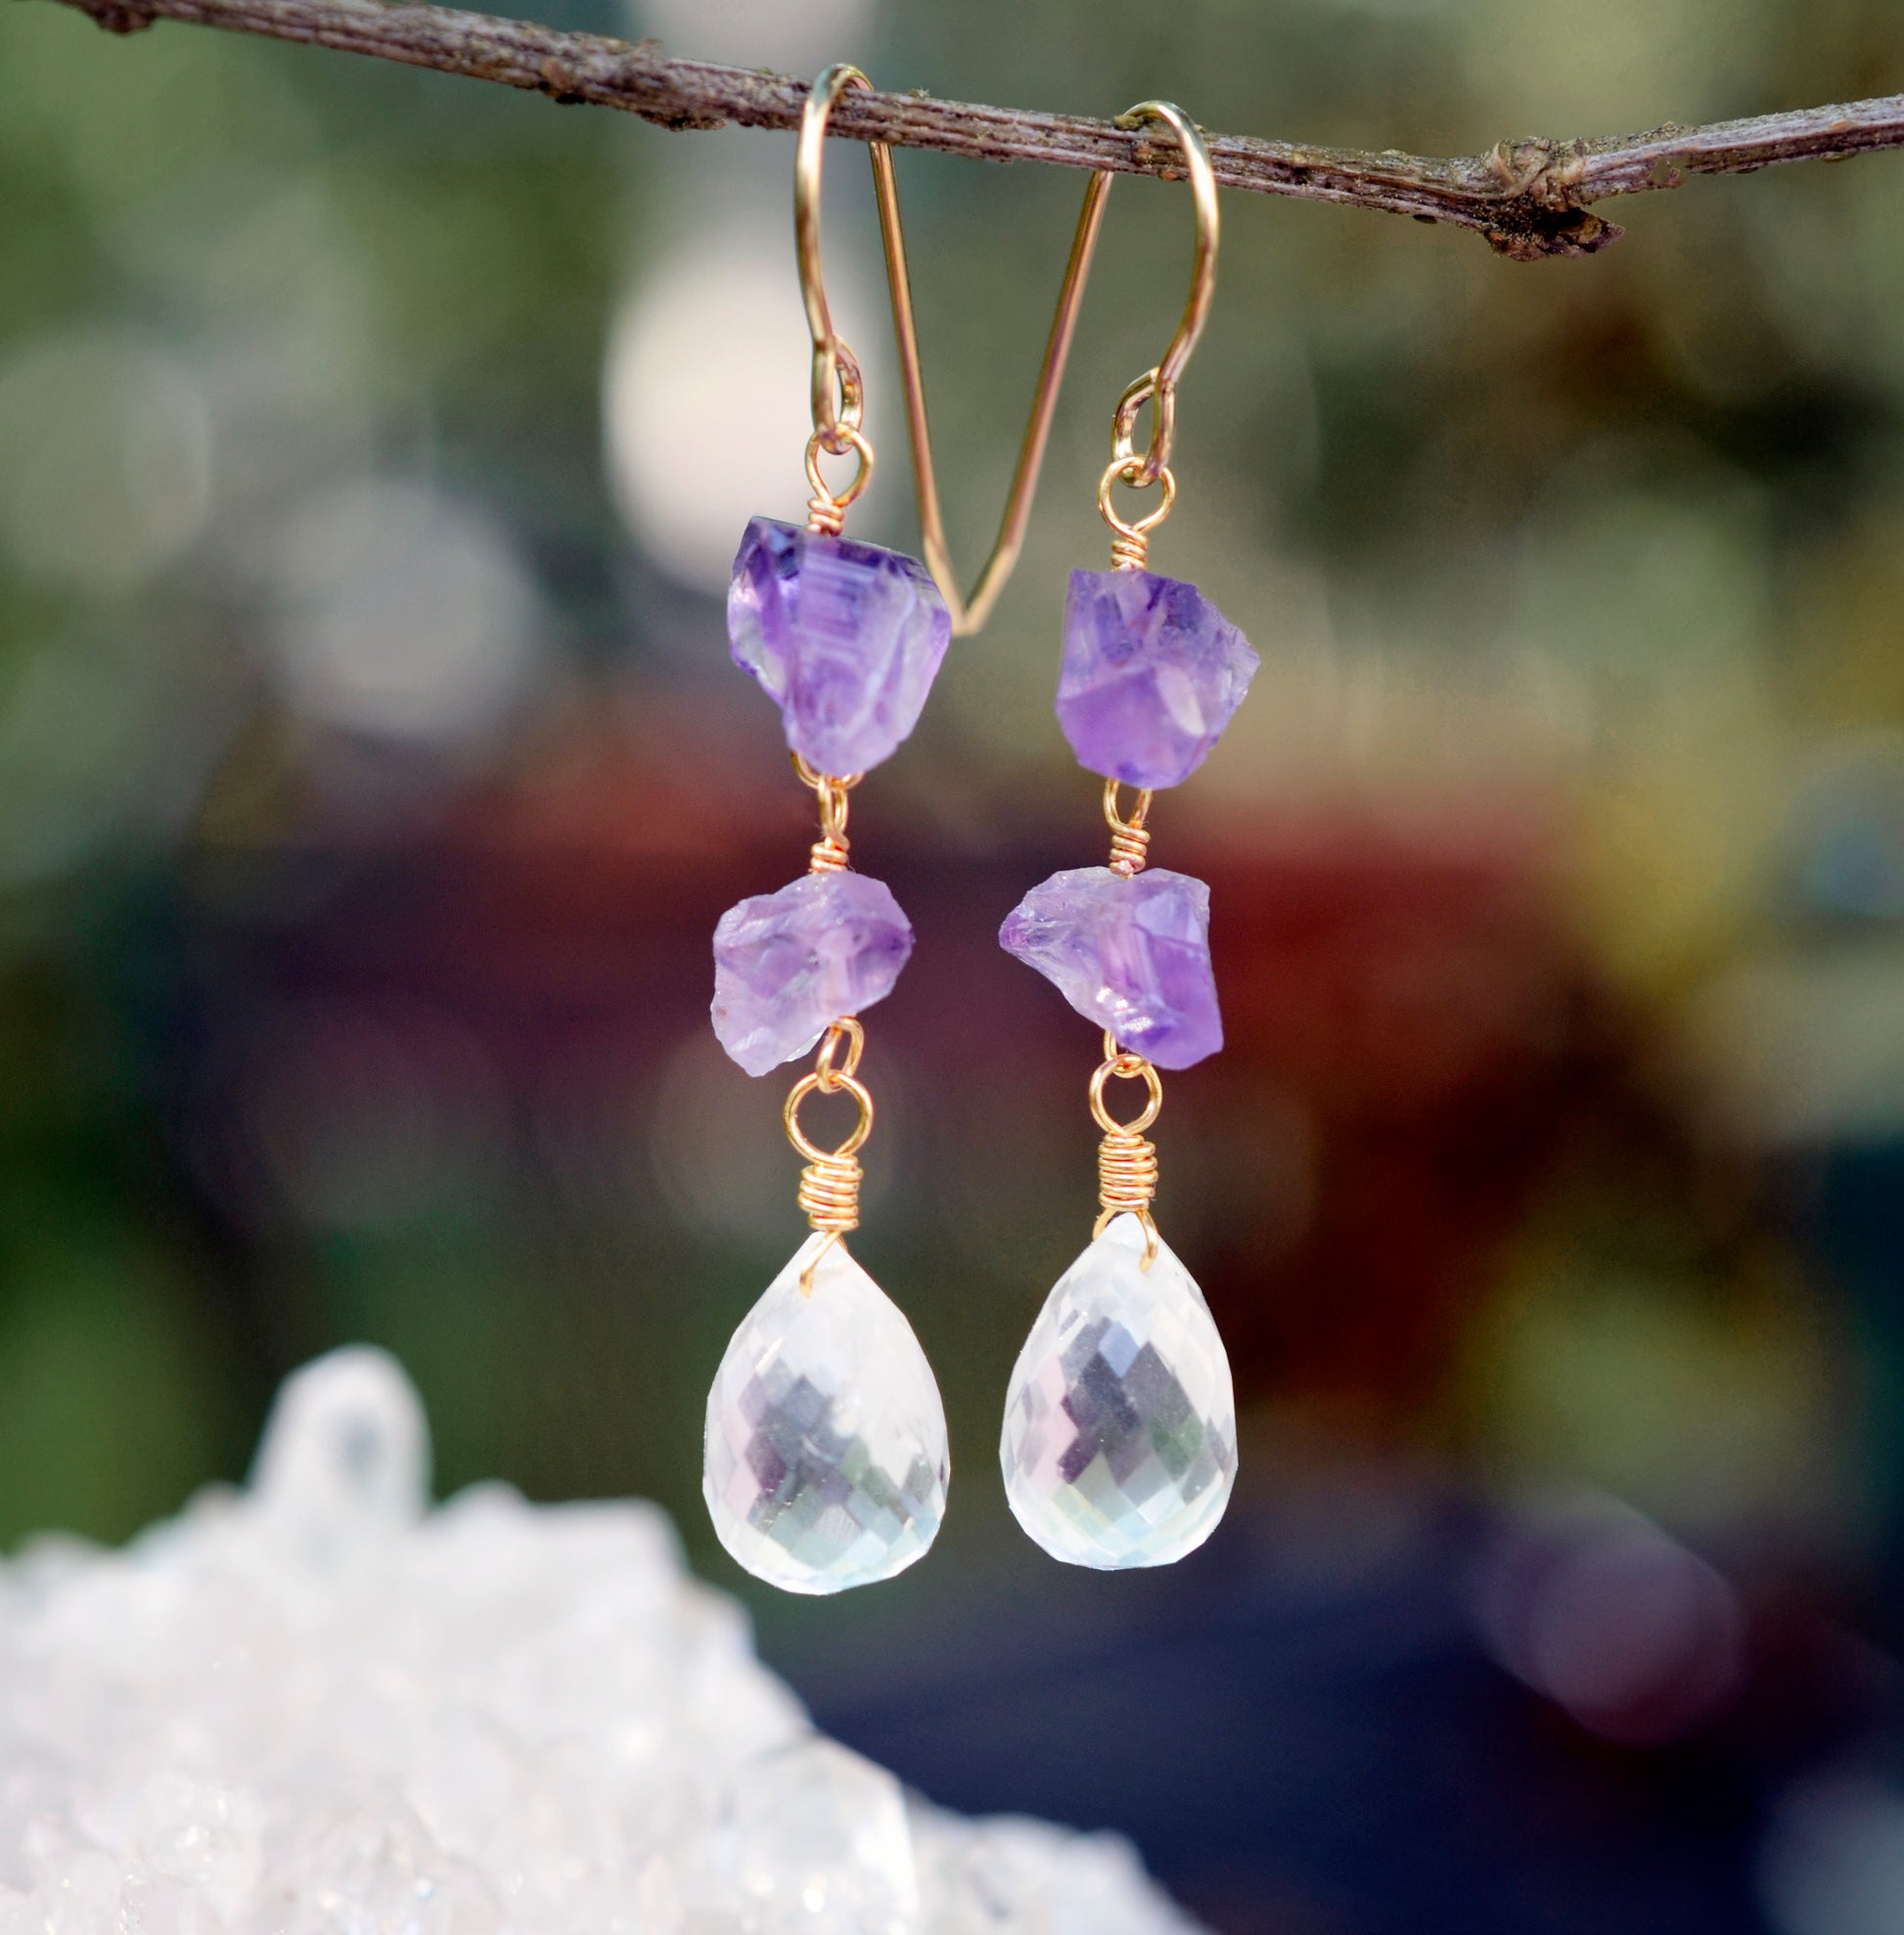 Raw Amethyst and Crystal Quartz Earrings, 14k Gold Filled or Sterling Silver, Natural Crystal Gemstone Dangles, February Birthstone Jewelry